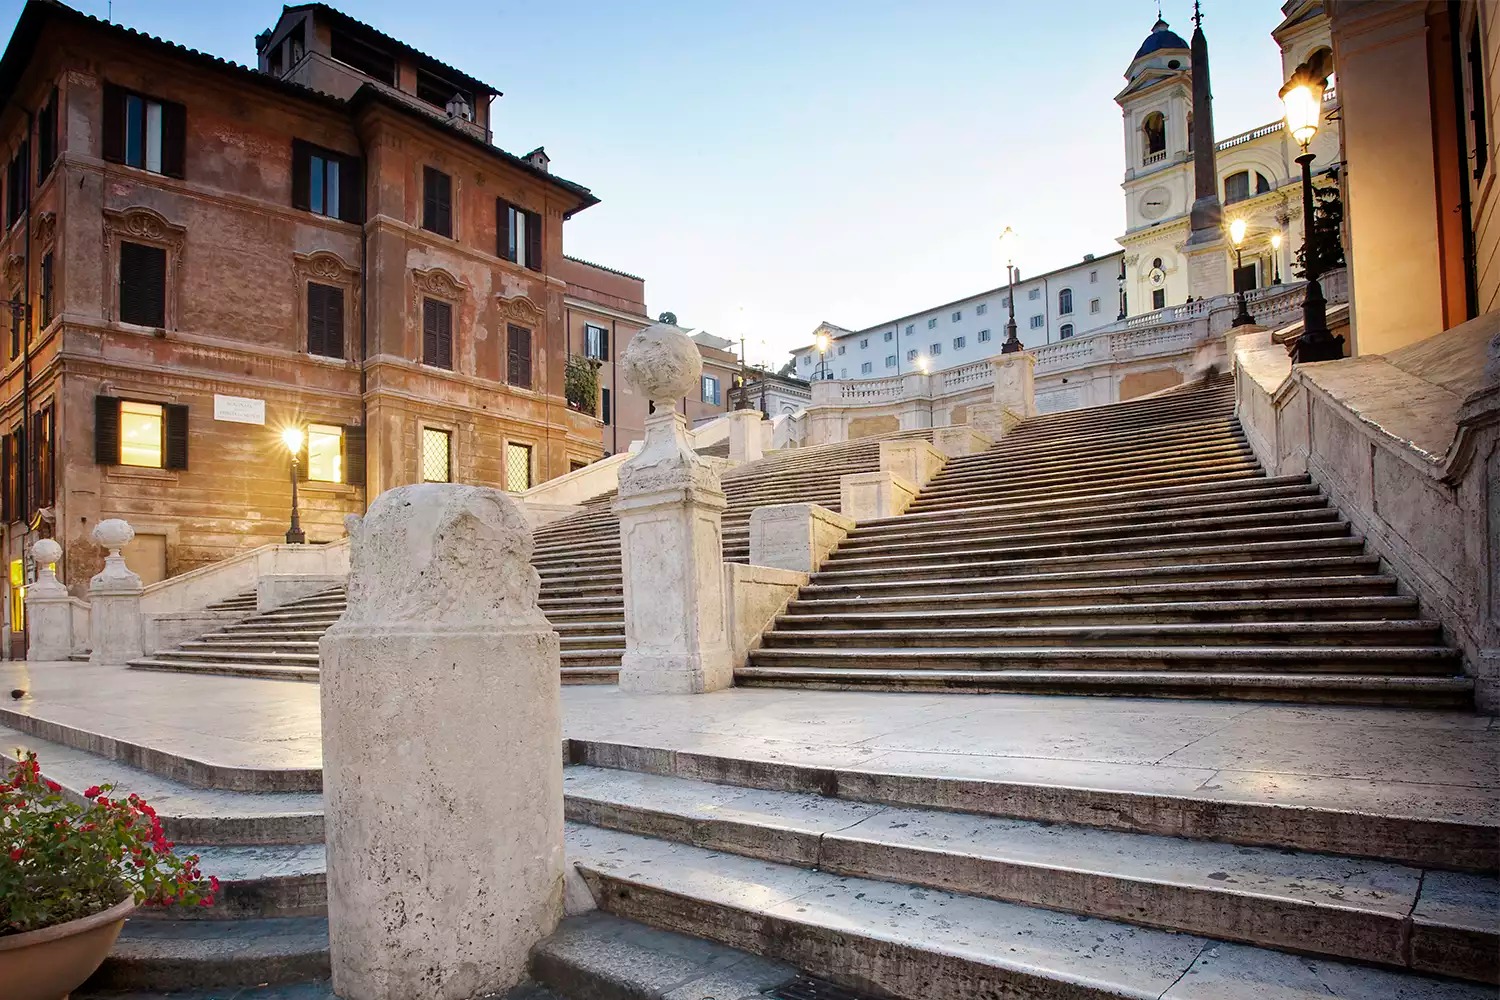 Take a Trip Around Italy in This Quiz — If You Get 18/25, You Win The Spanish Steps